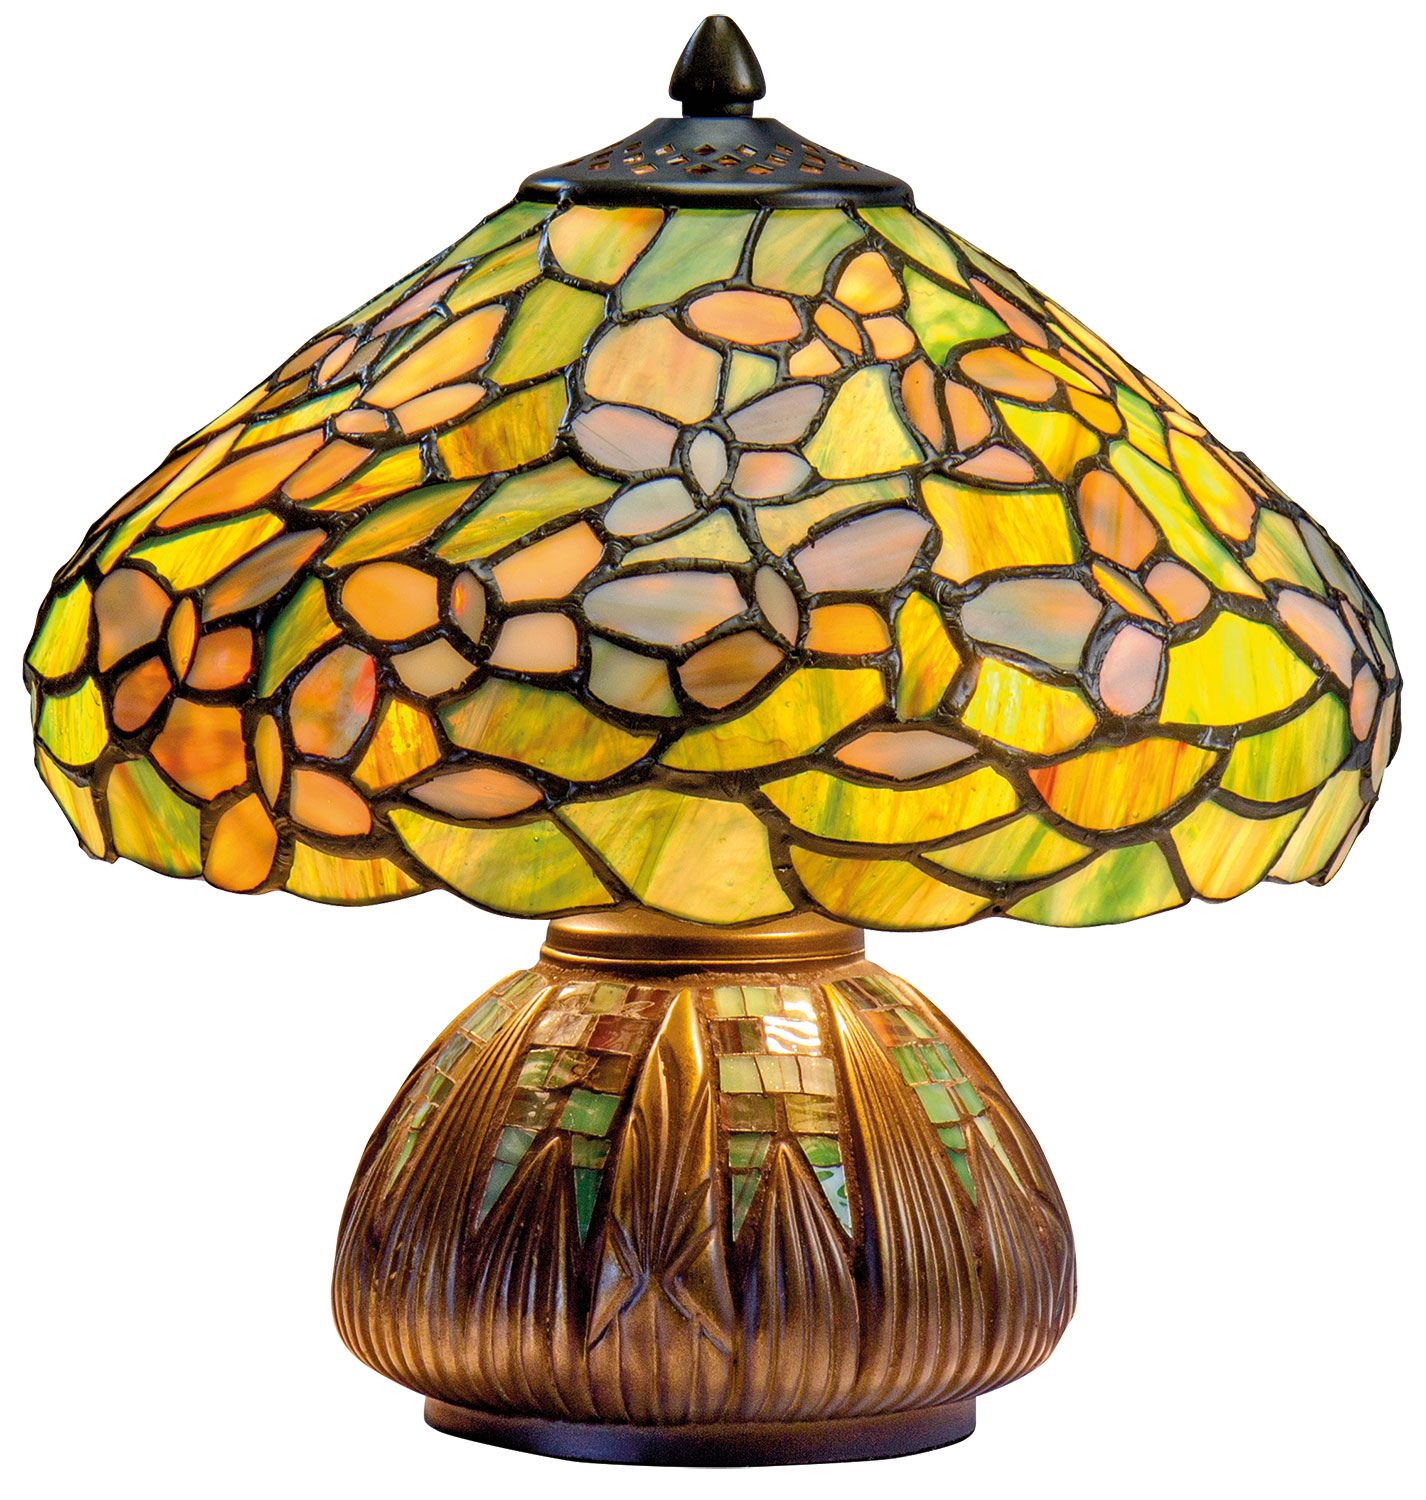 Table lamp "Butterfly" - after Louis C. Tiffany